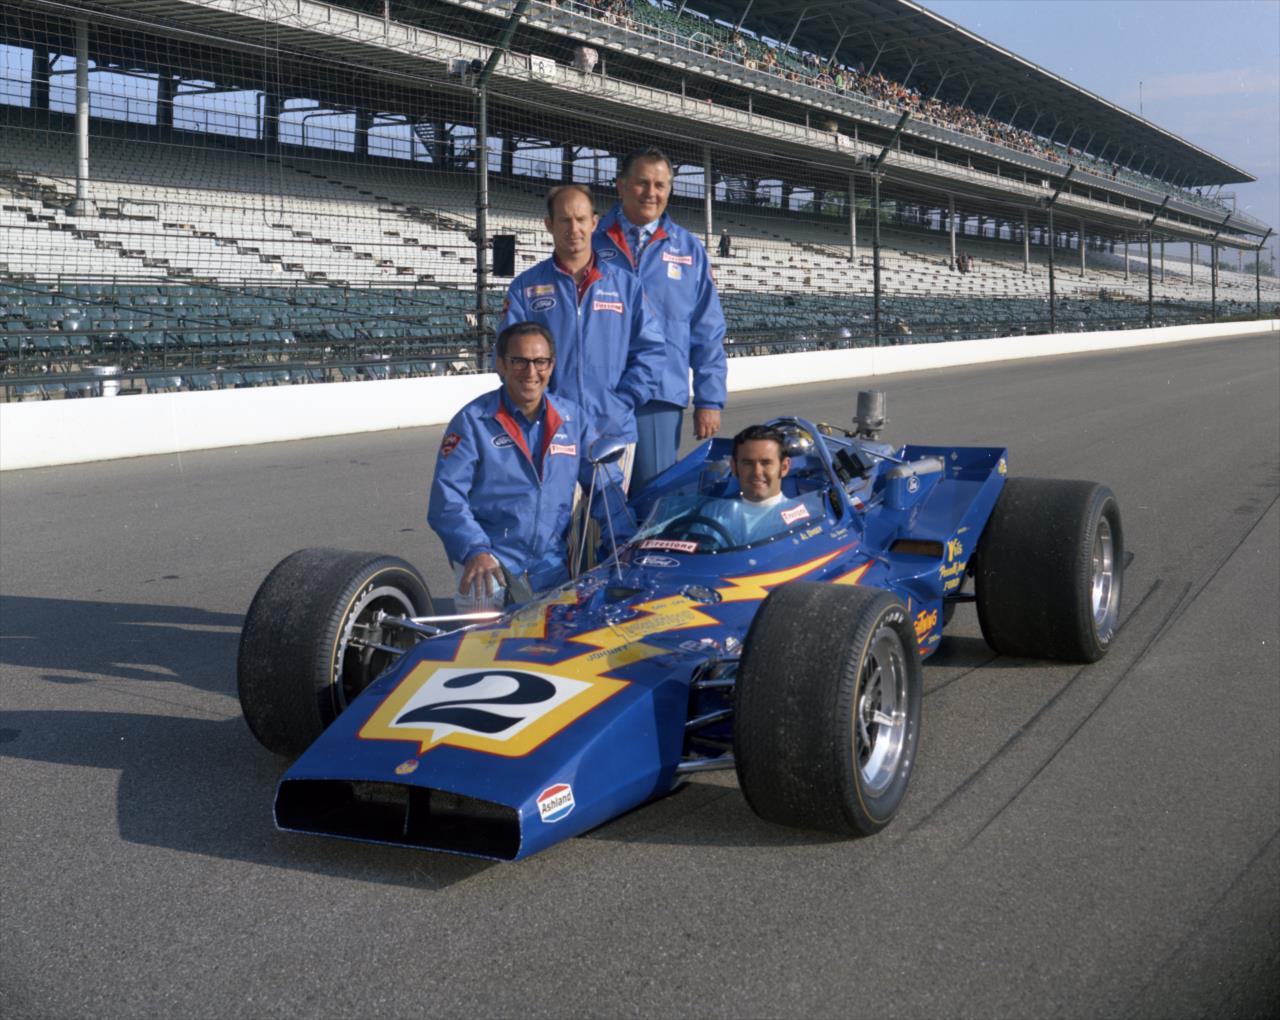 Al Unser won his first Indianapolis 500 in 1970 with Vel's Parnelli Racing. Legendary mechanic George Bignotti oversaw Unser's car.